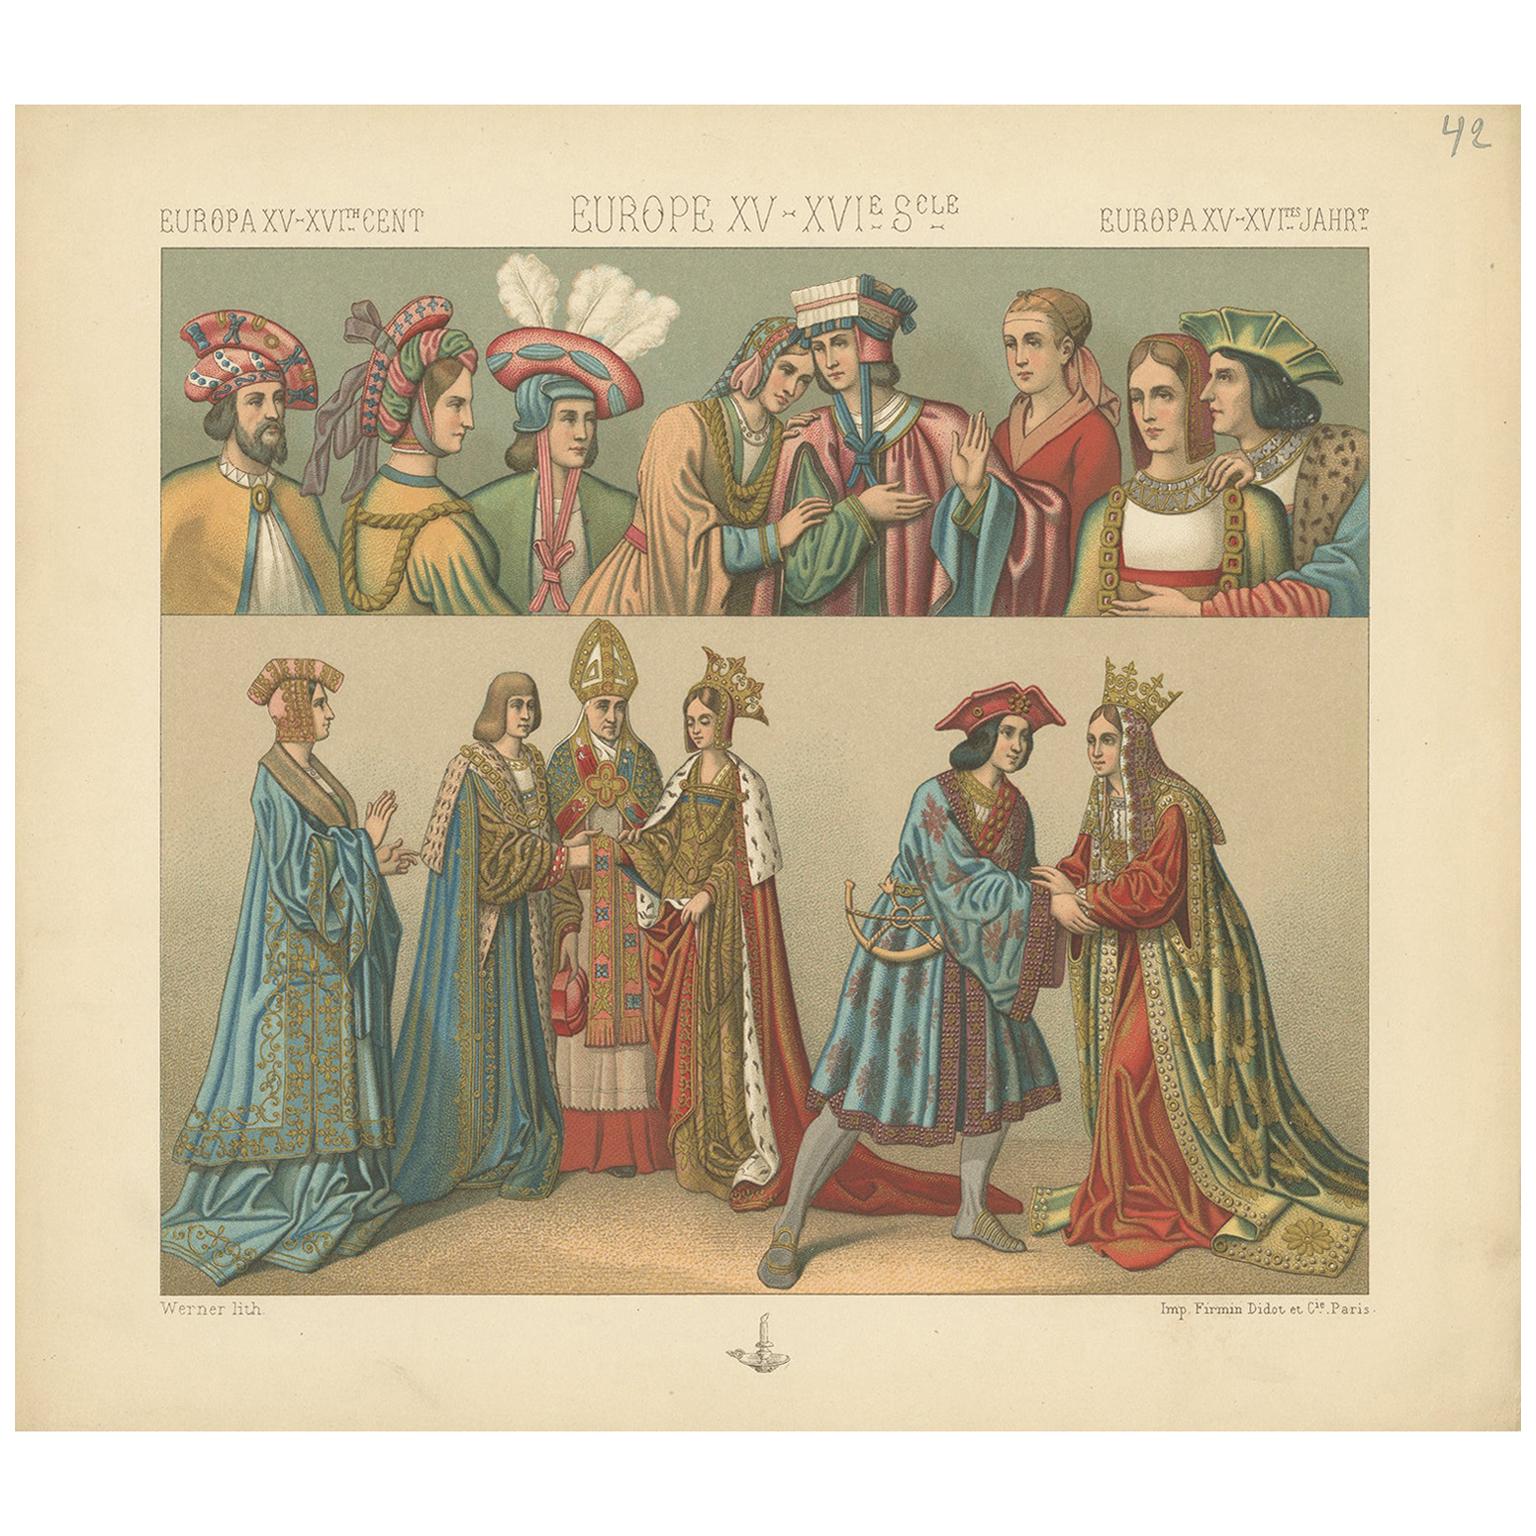 Pl 42 Antique Print of European 15th-16th Century Costumes by Racinet